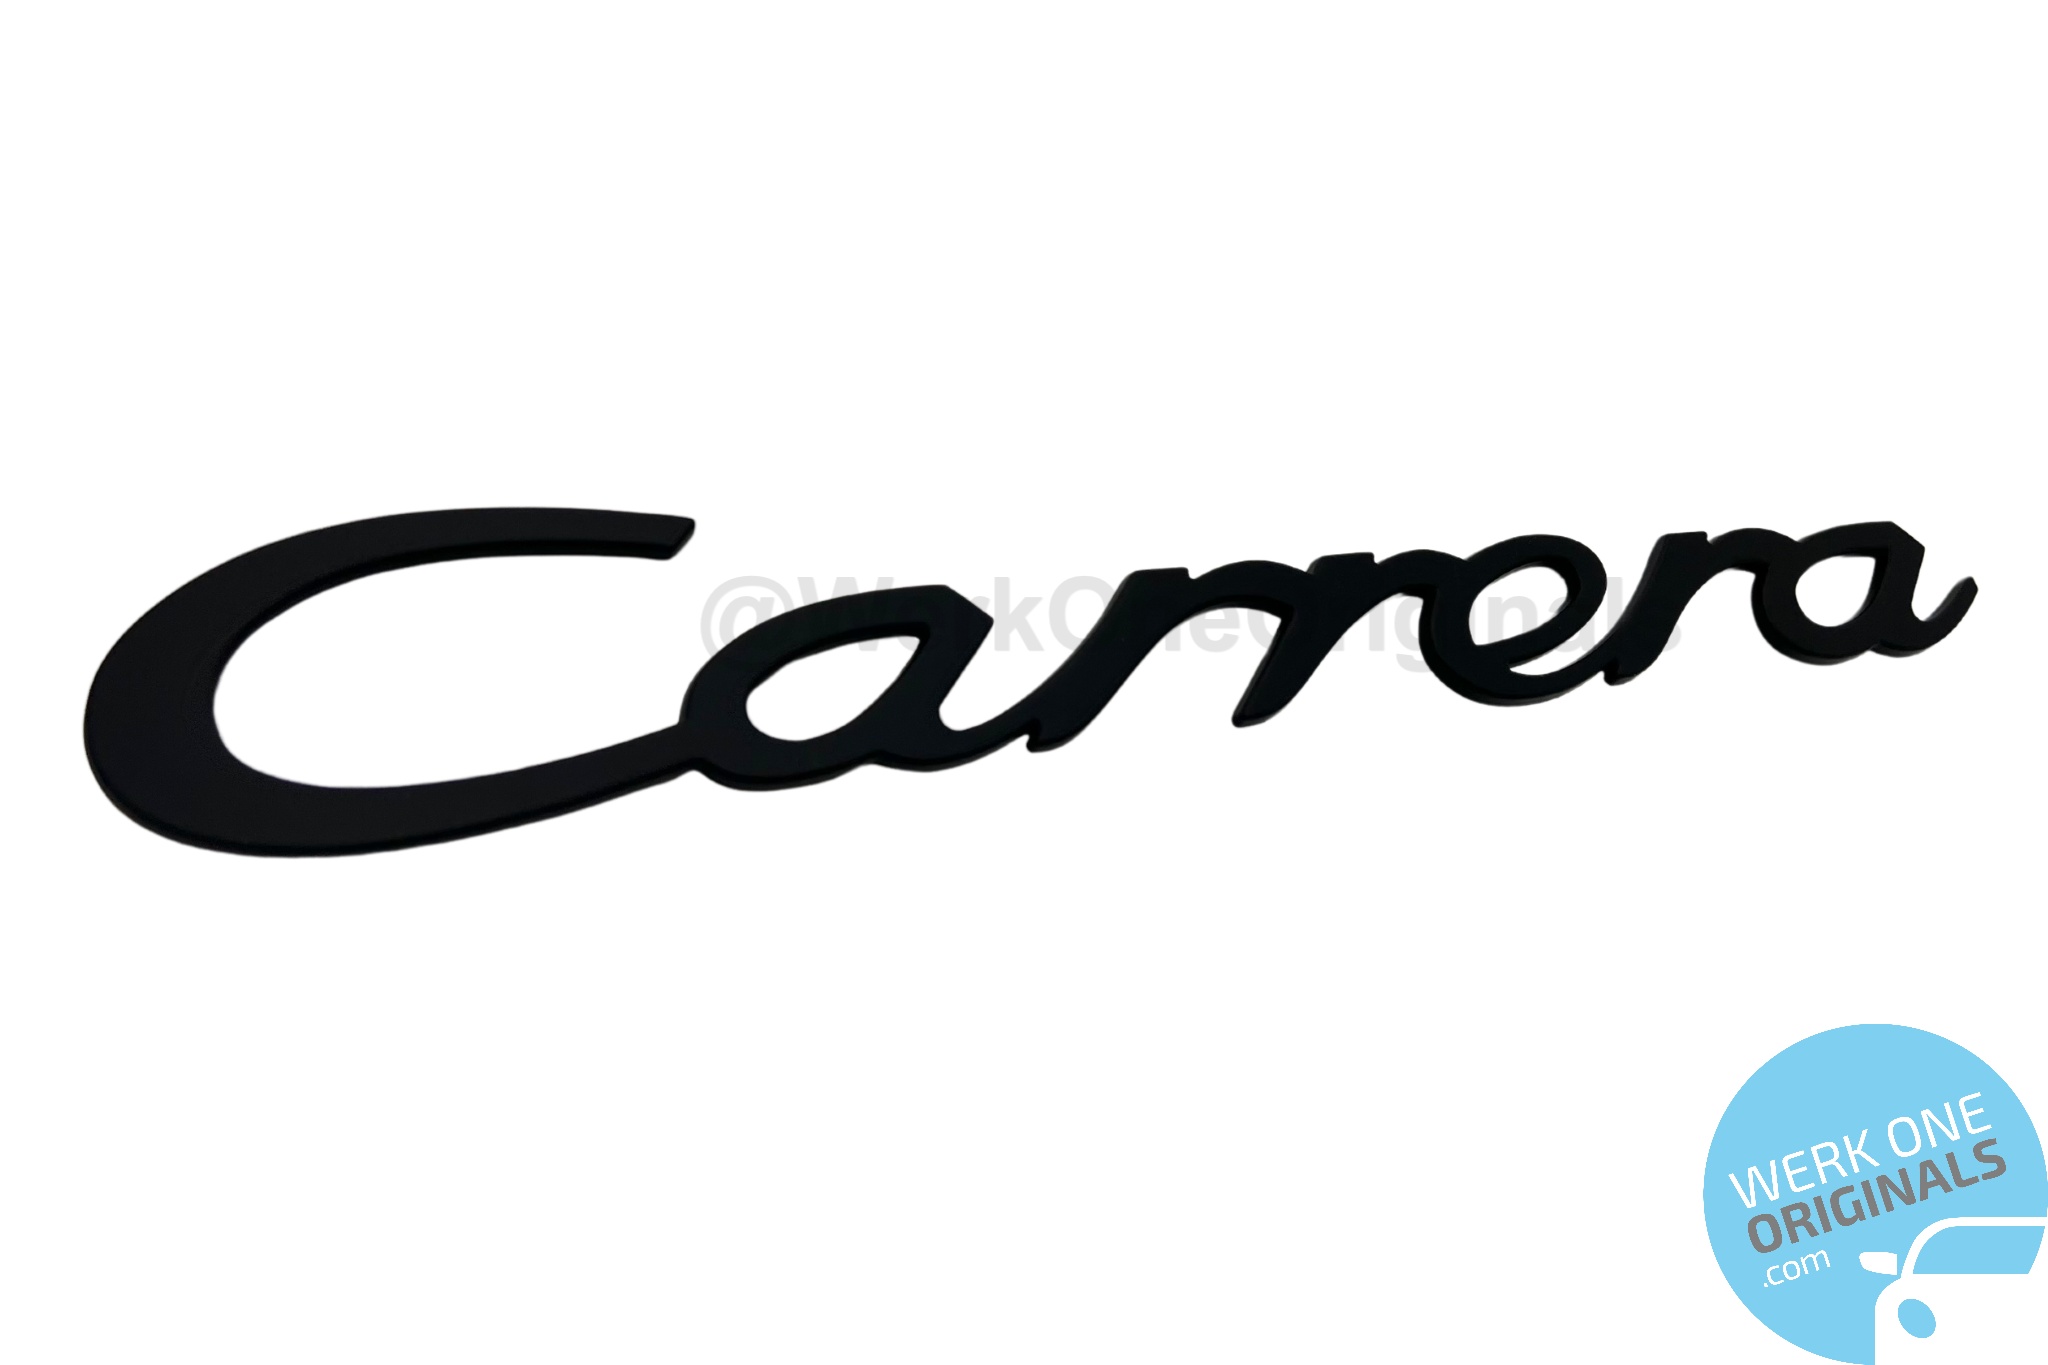 Porsche Official 'Carrera' Rear Badge Decal in Matte Black for 911 Type 911G Models